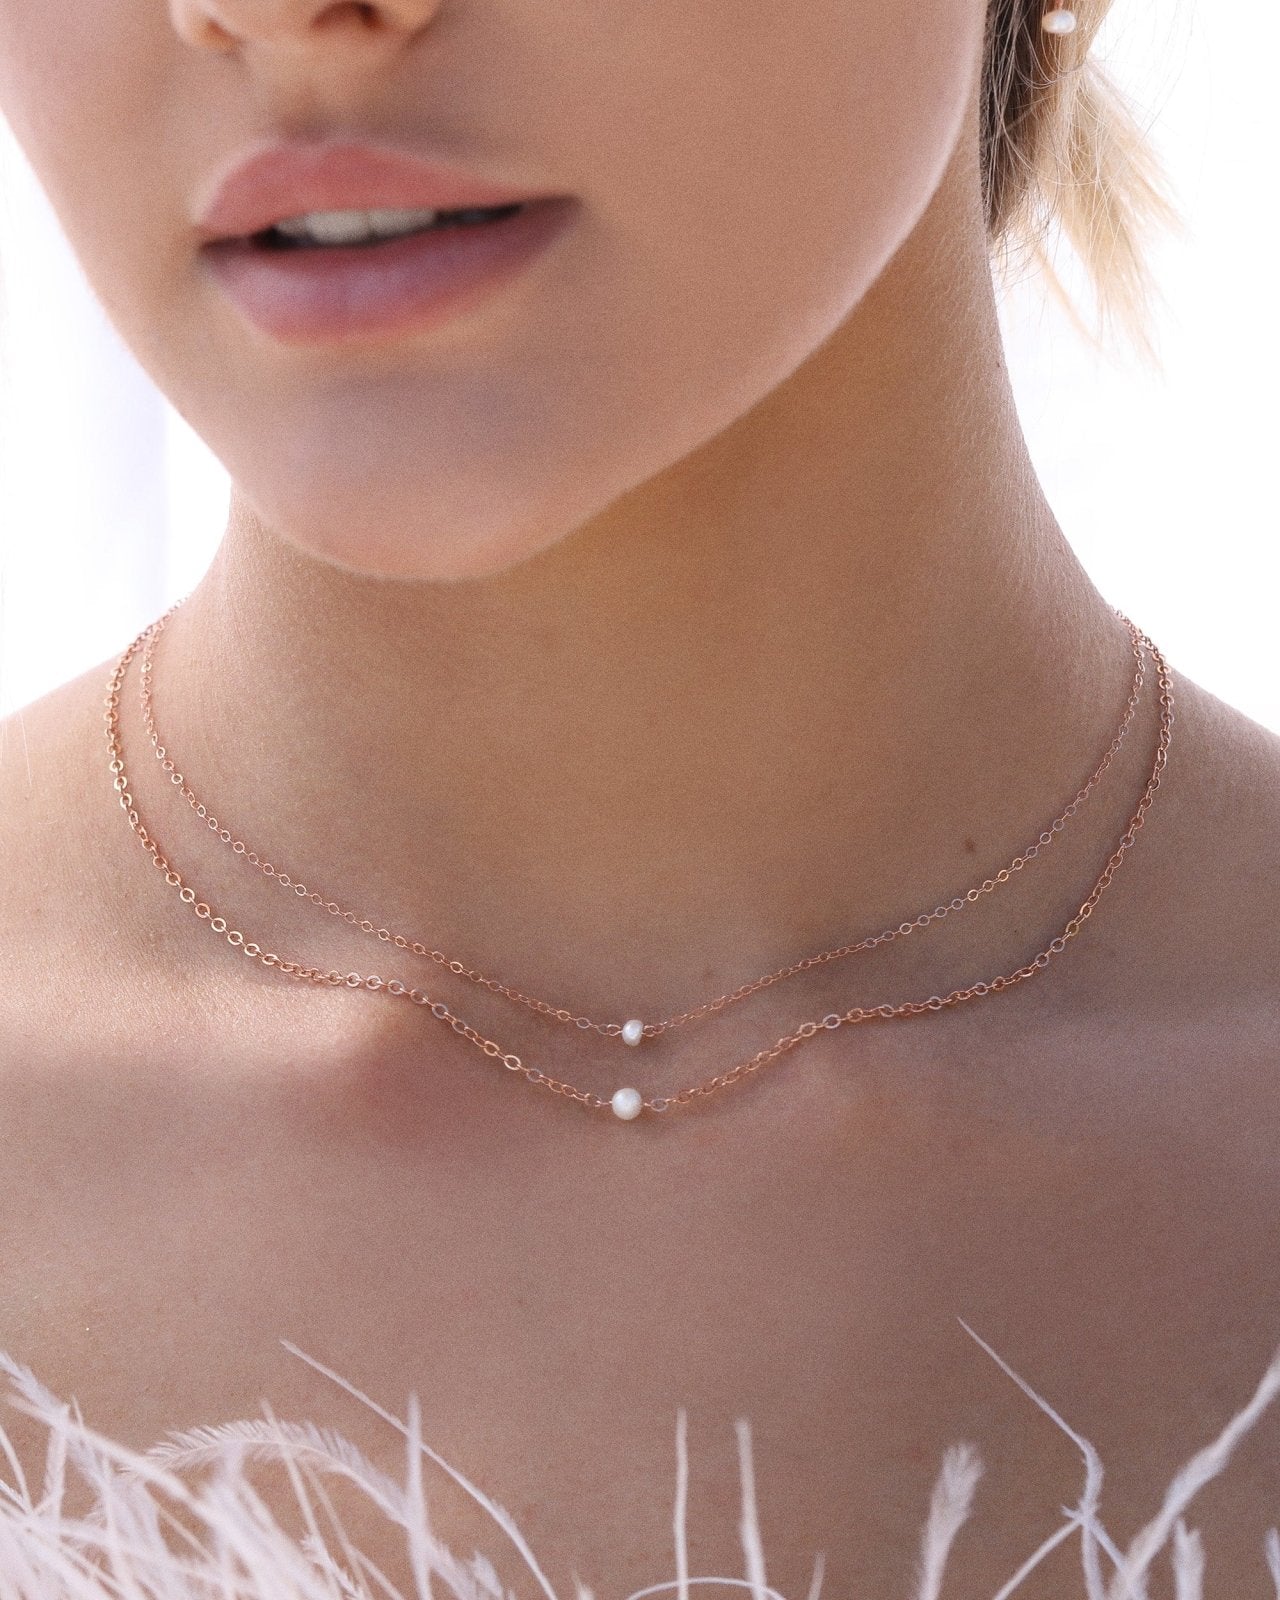 SMALL FRESHWATER PEARL NECKLACE- 14k Rose Gold - The Littl - Deluxe Chain - 37cm (choker)